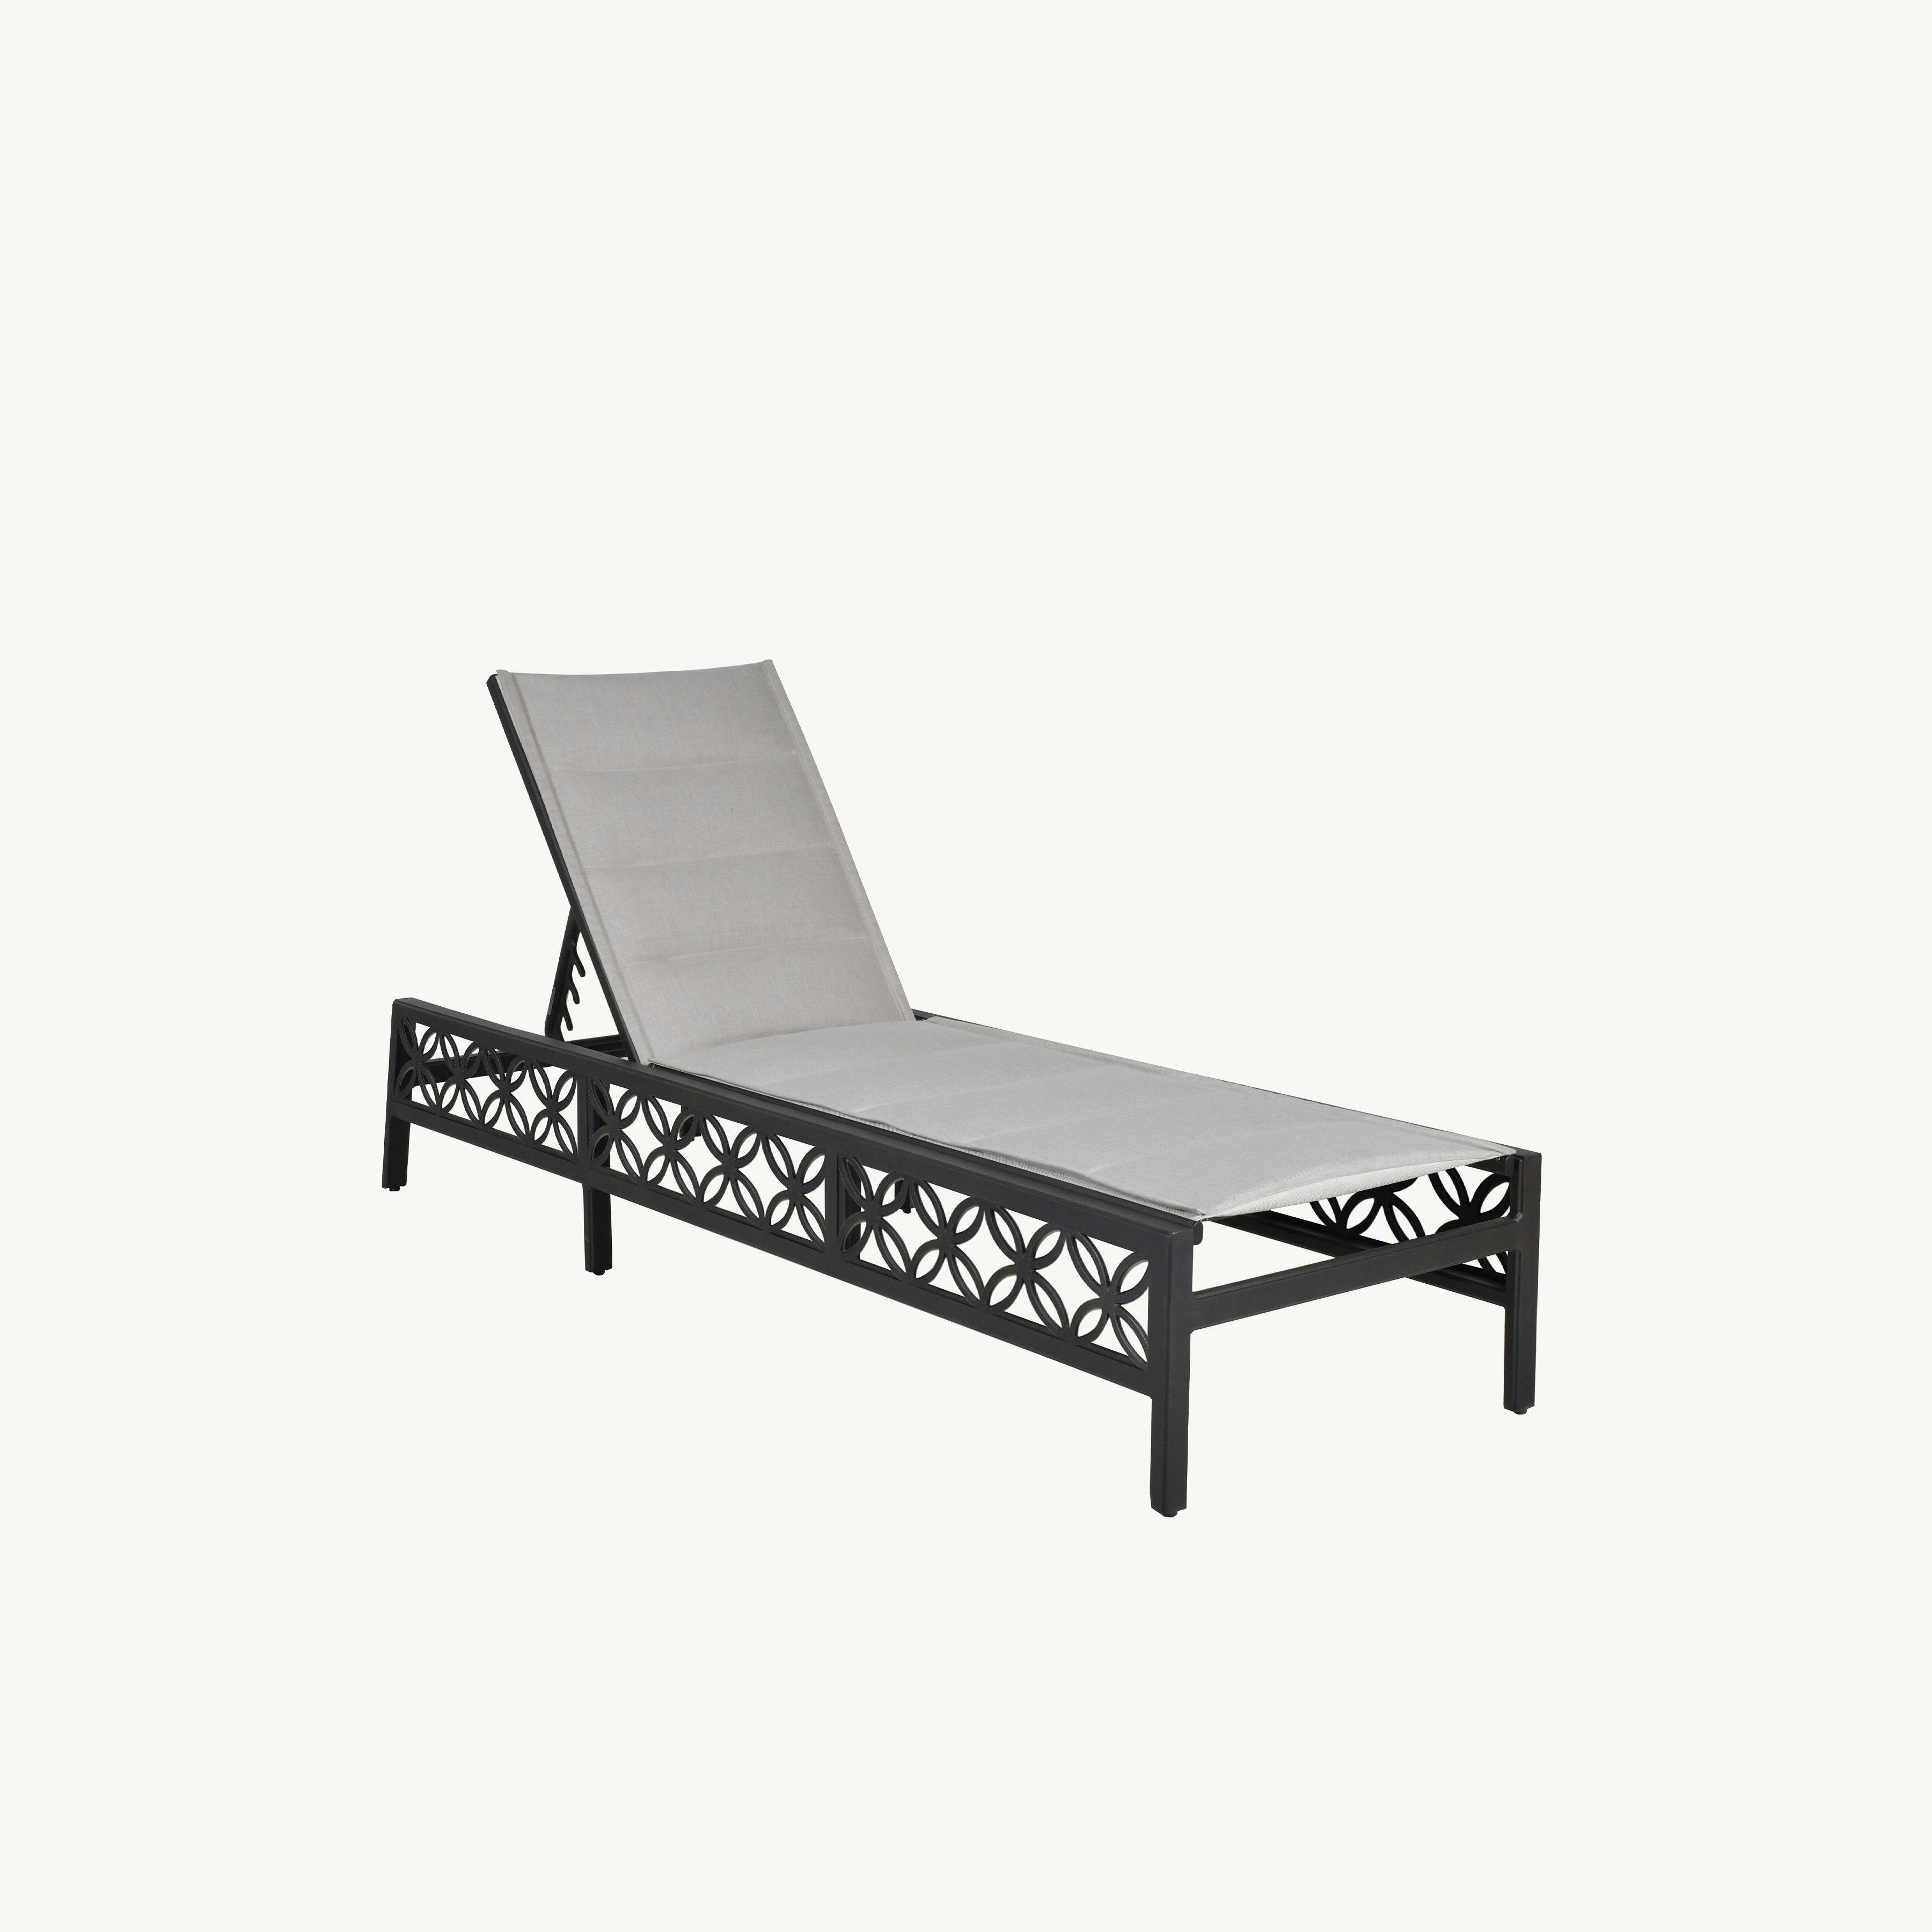 Saxton Sling Chaise - Orleans (w/ optional seat pad)